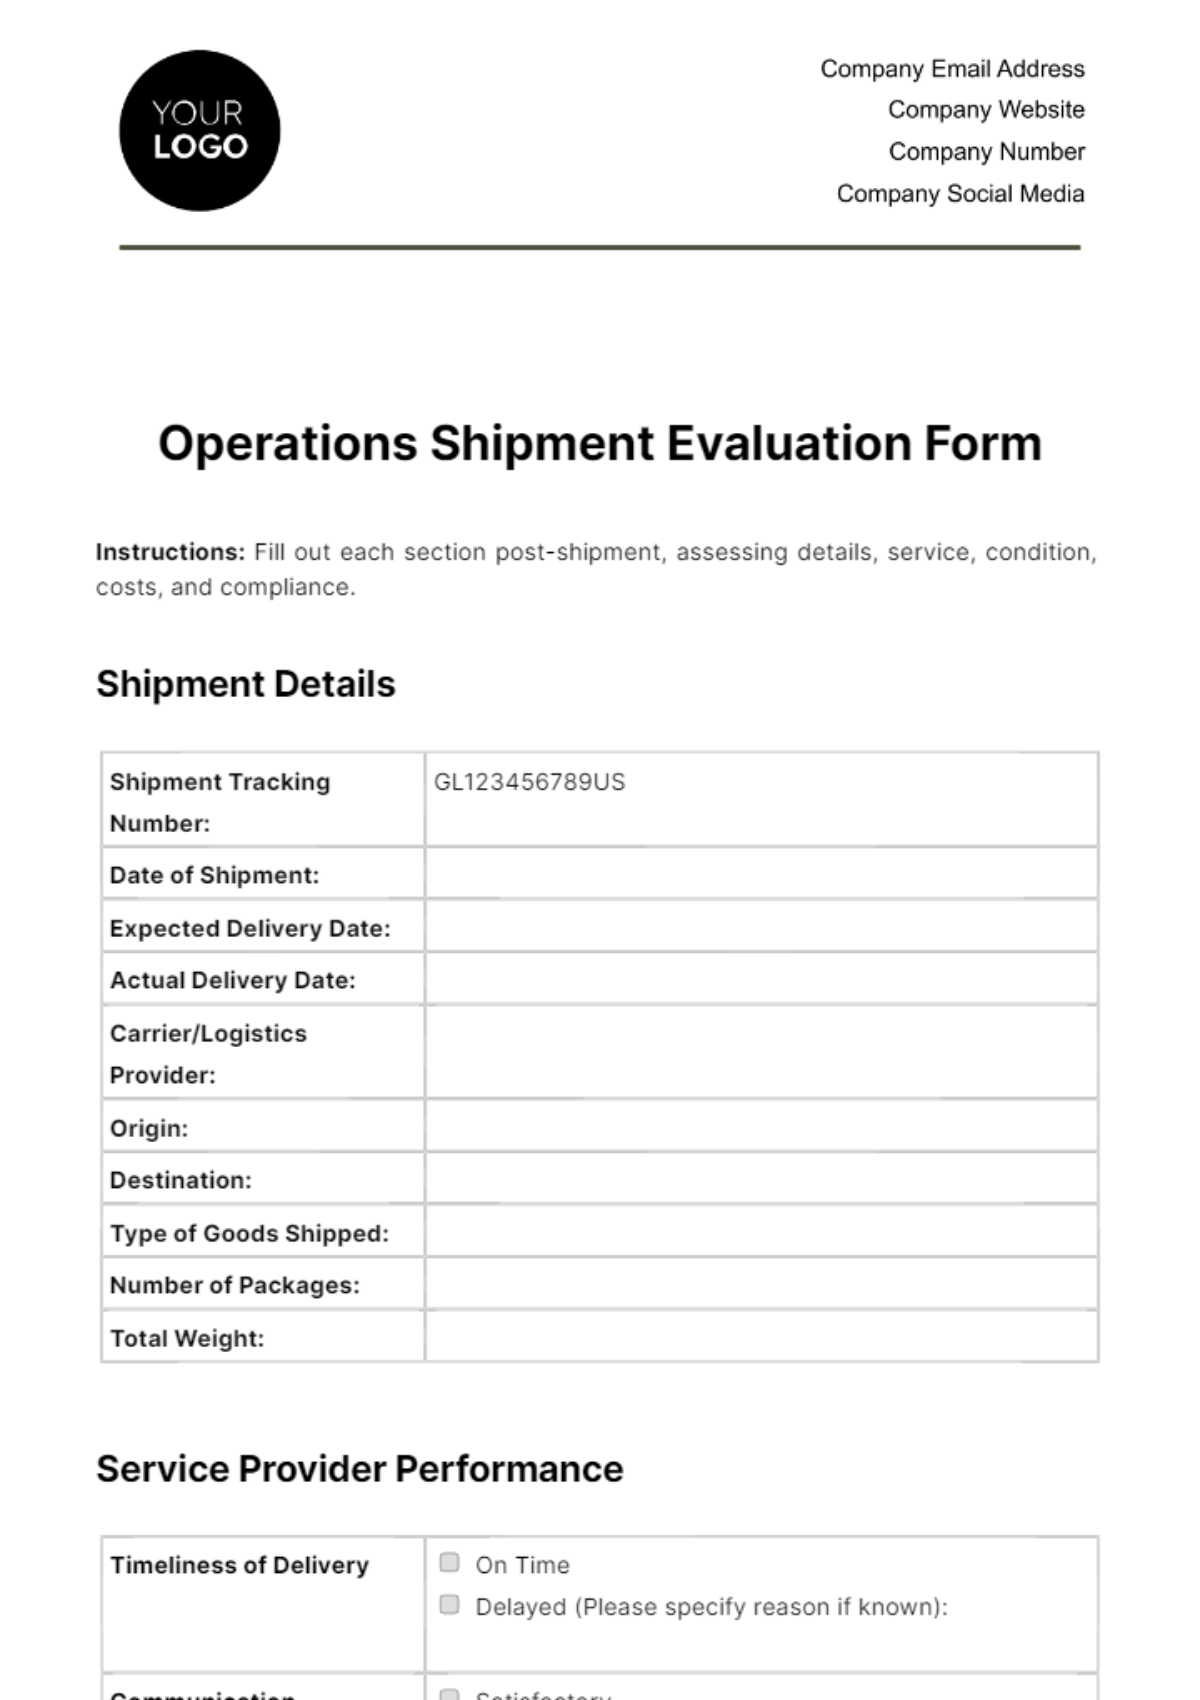 Free Operations Shipment Evaluation Form Template